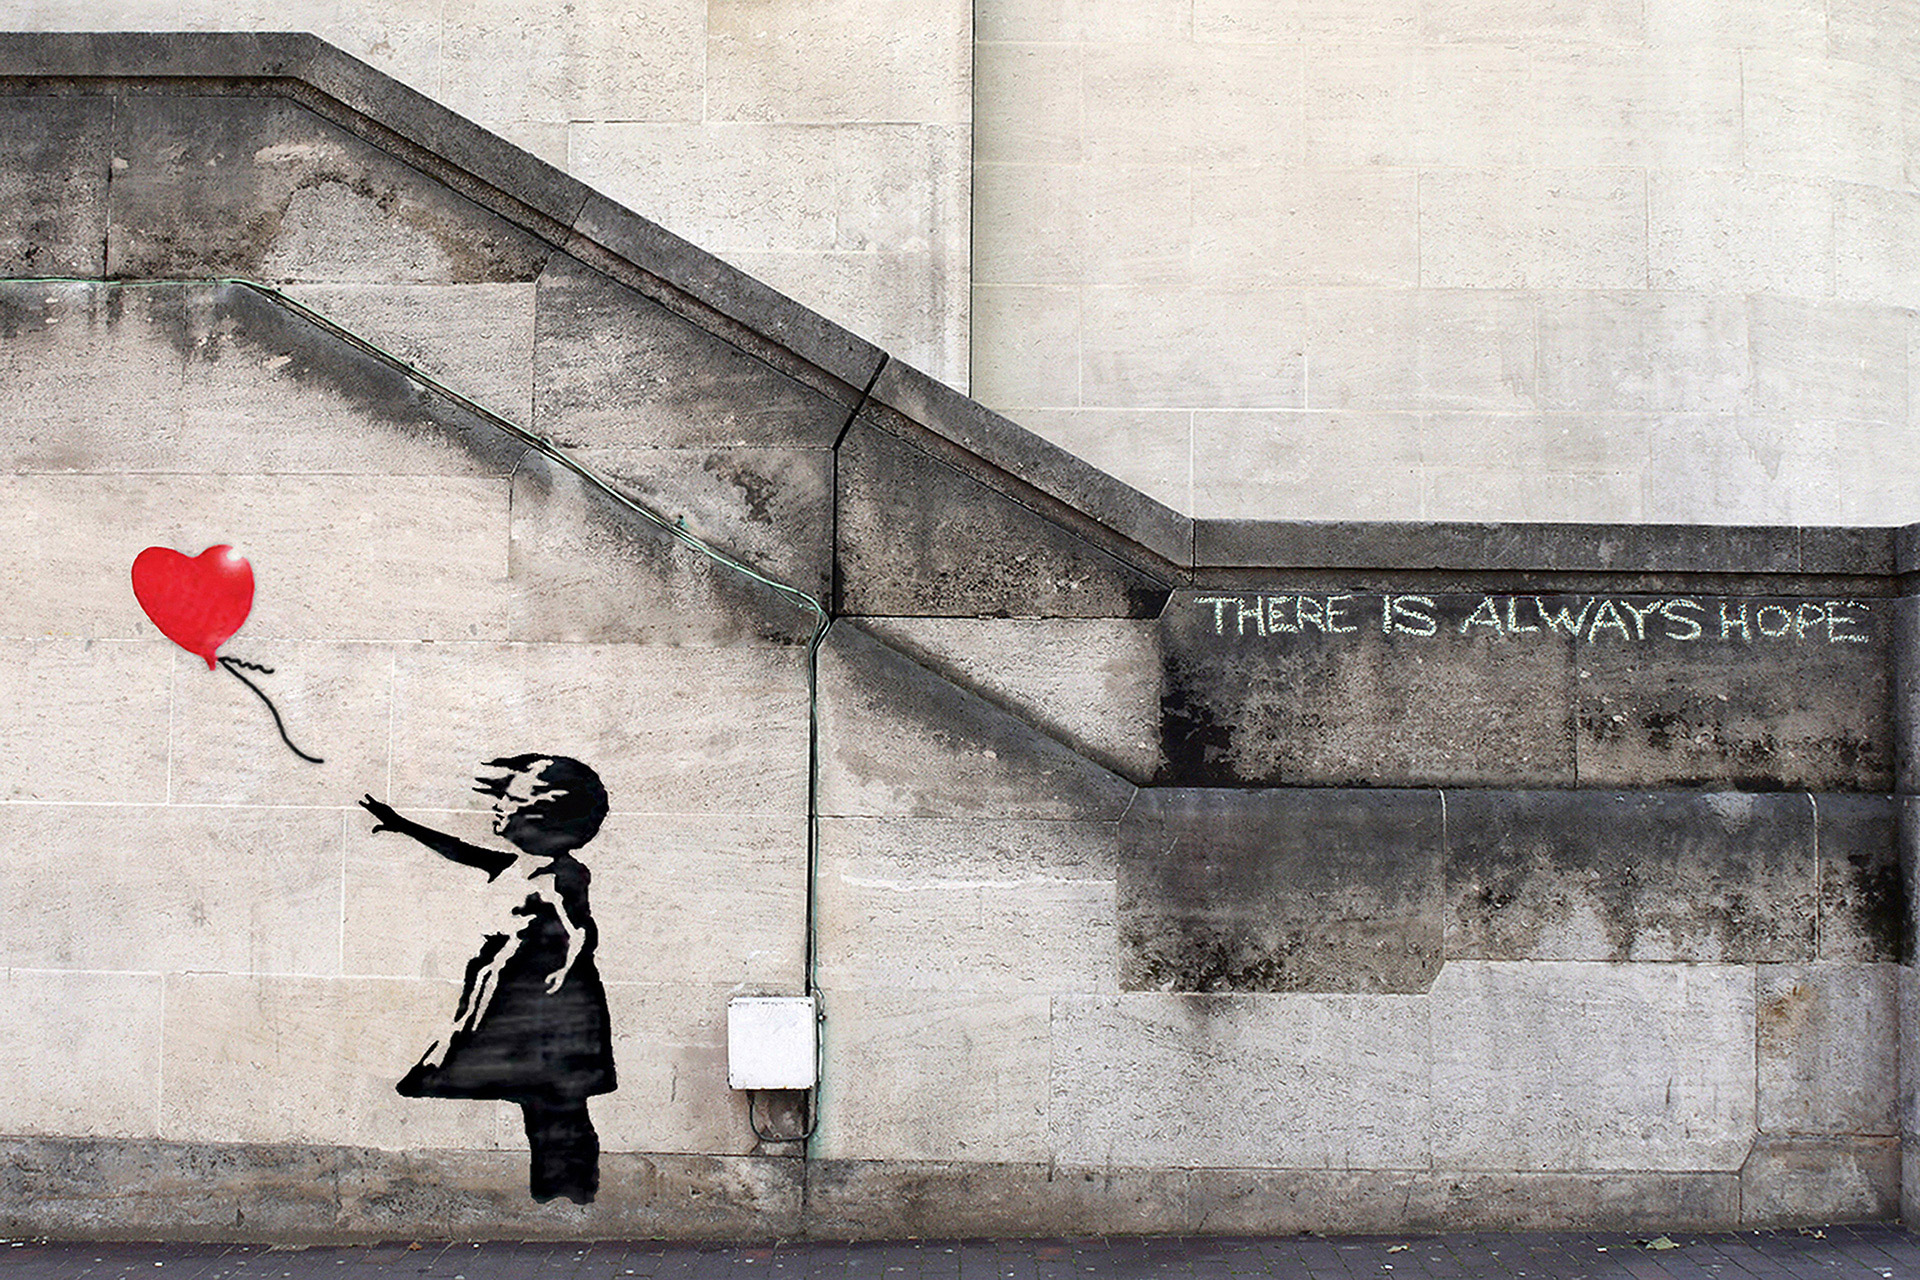 Banksy : There is always hope